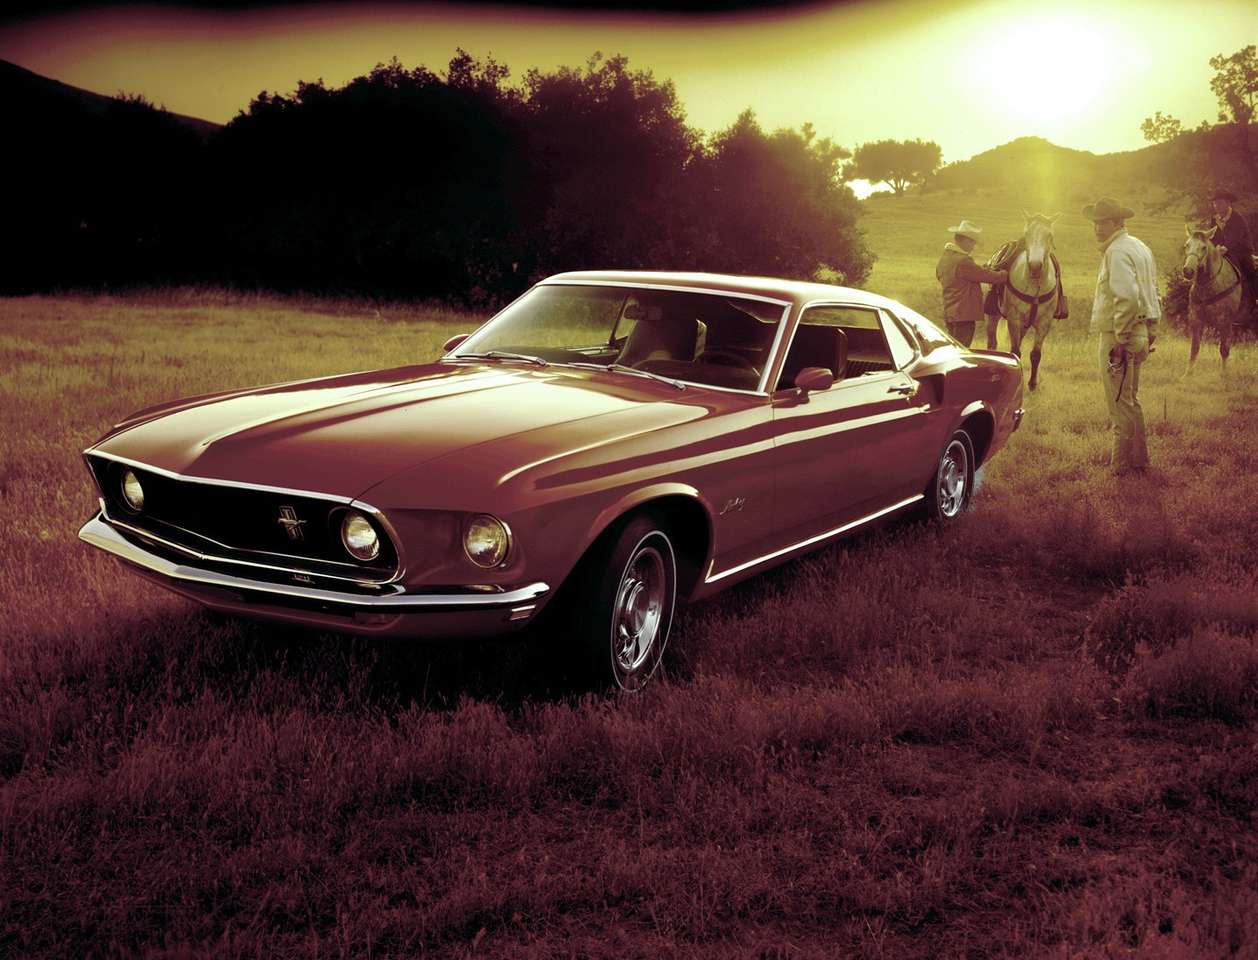 1969 Ford Mustang Fastback online puzzel